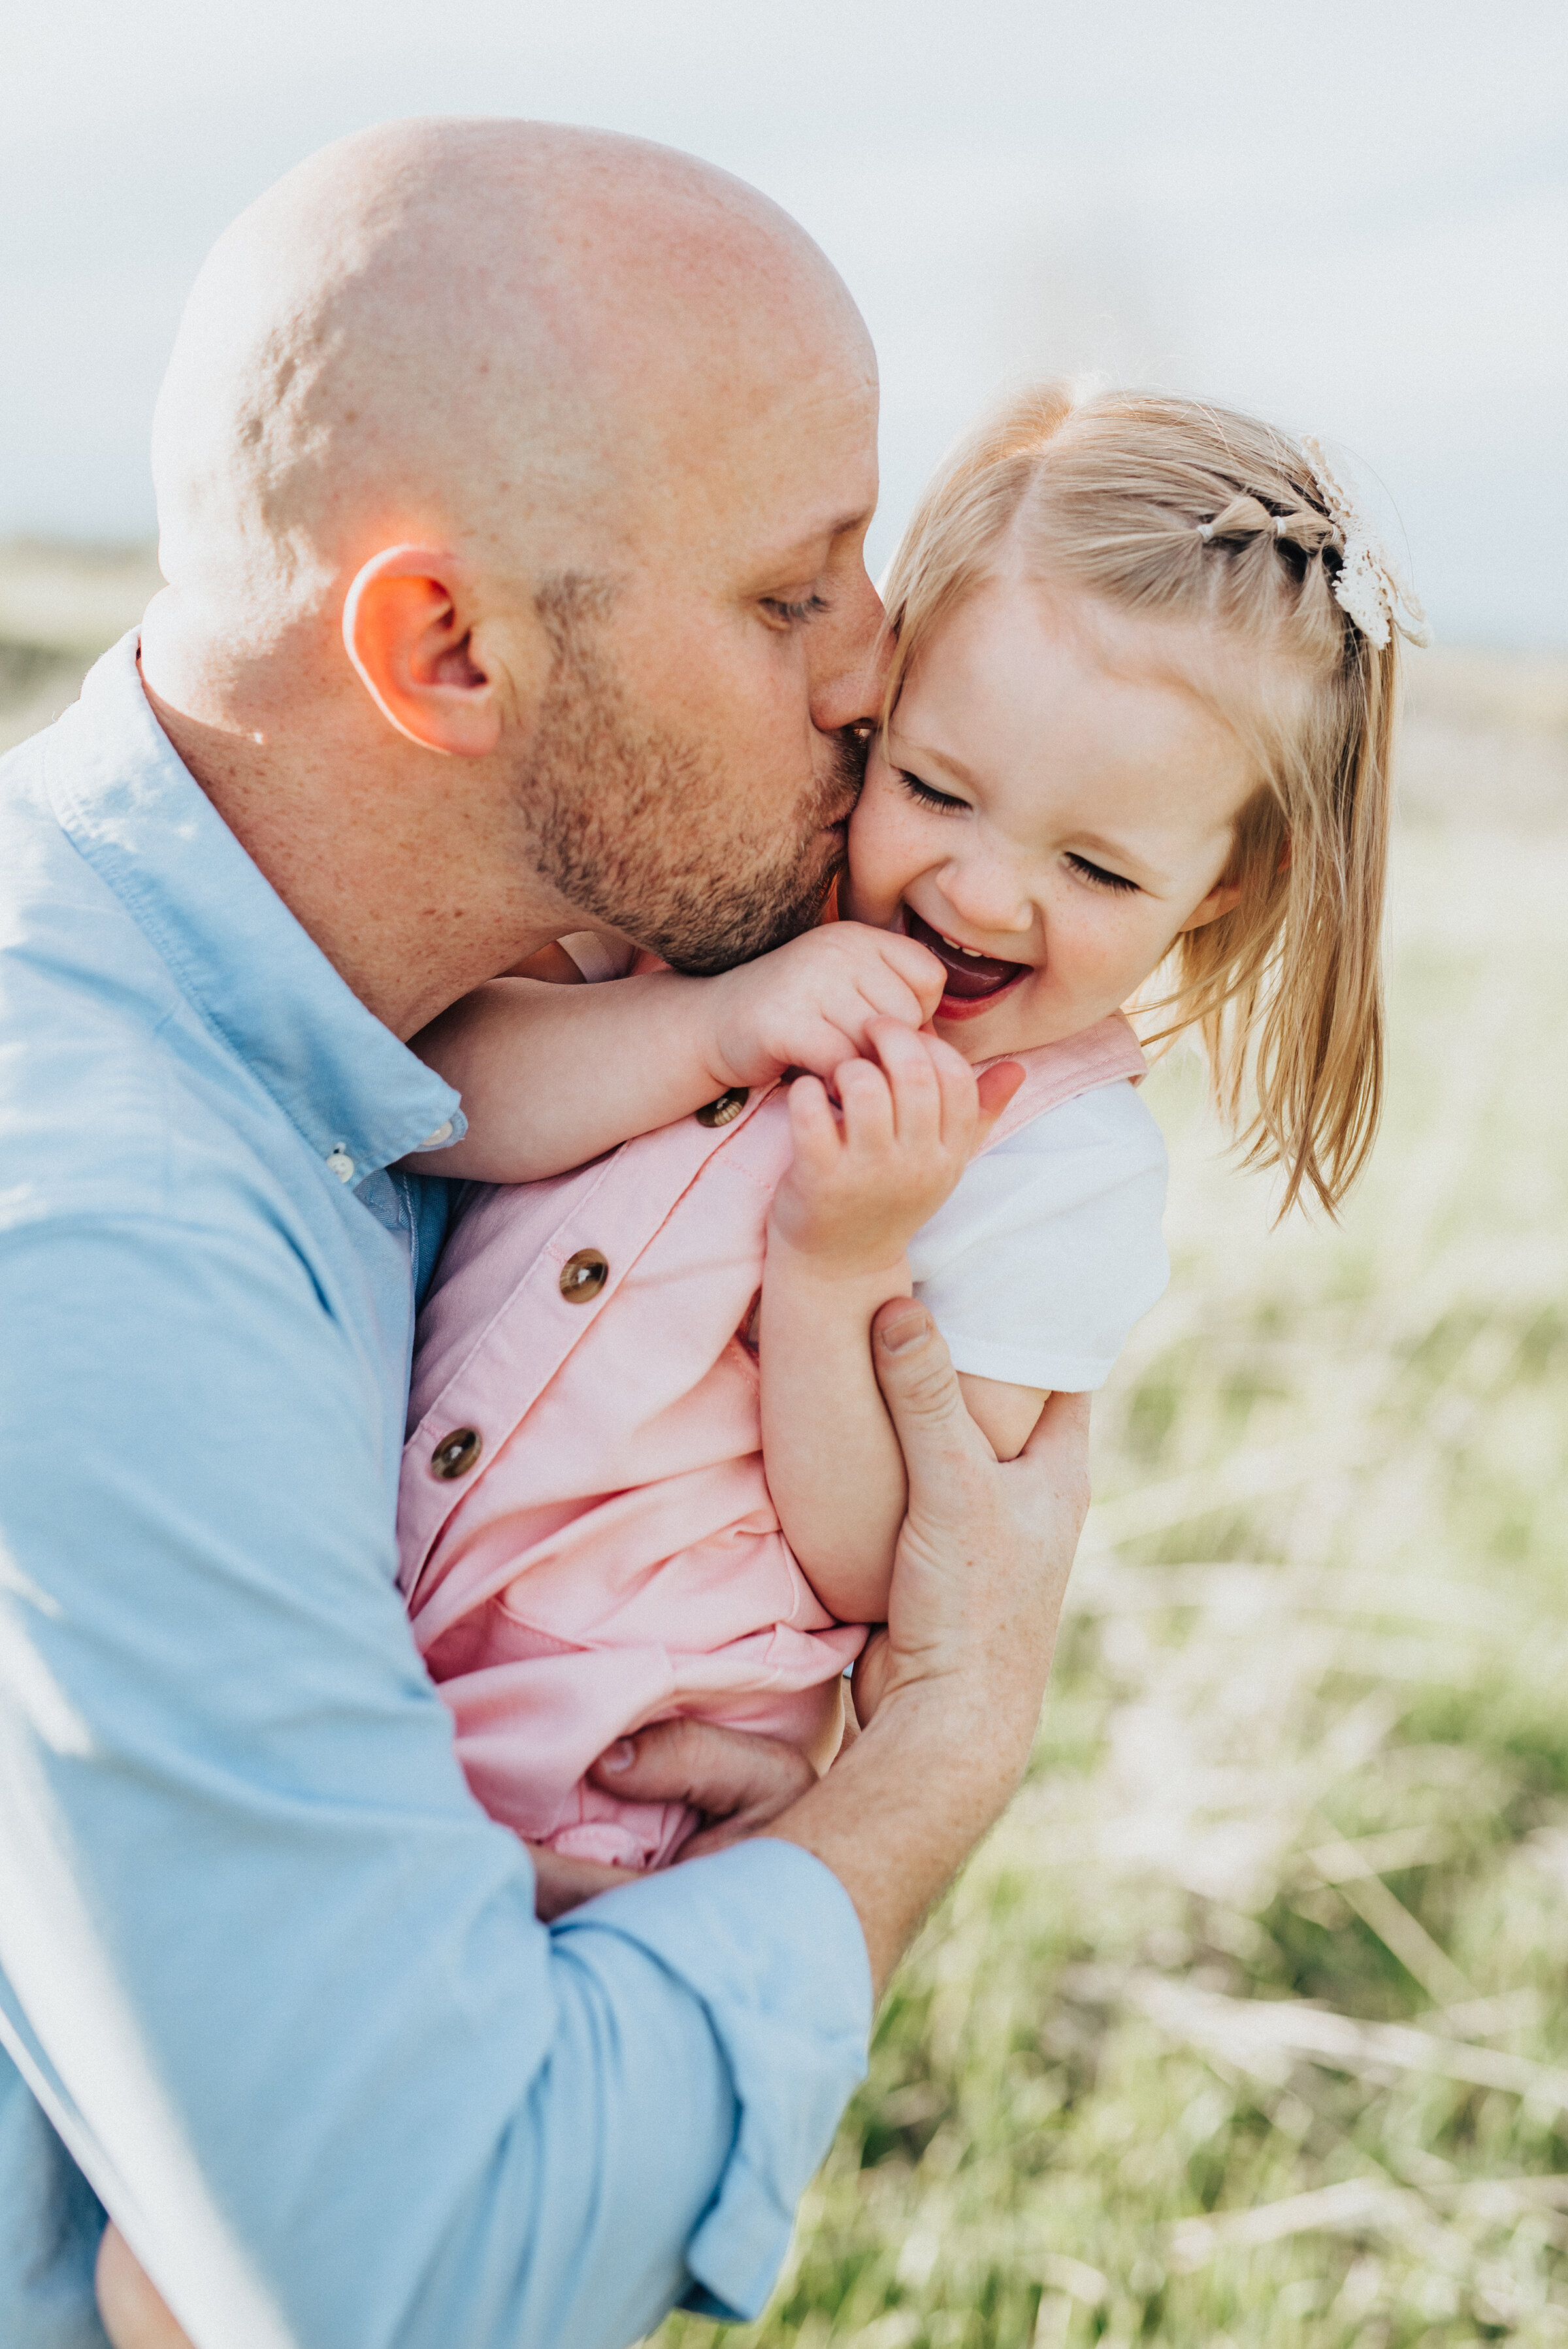  Happy father kisses his daughter's cheek during a mountain family portrait session. Logan utah photographer wellsville mountain families father and daughter photos family pose ideas family portraits utah photographer luxury family photoshoot #familyphotography #familyphotographer #familysession #familyportraits #familyportrait #familyphotoshoot #familypose #familyphotographers #familyposes #familyphoto 